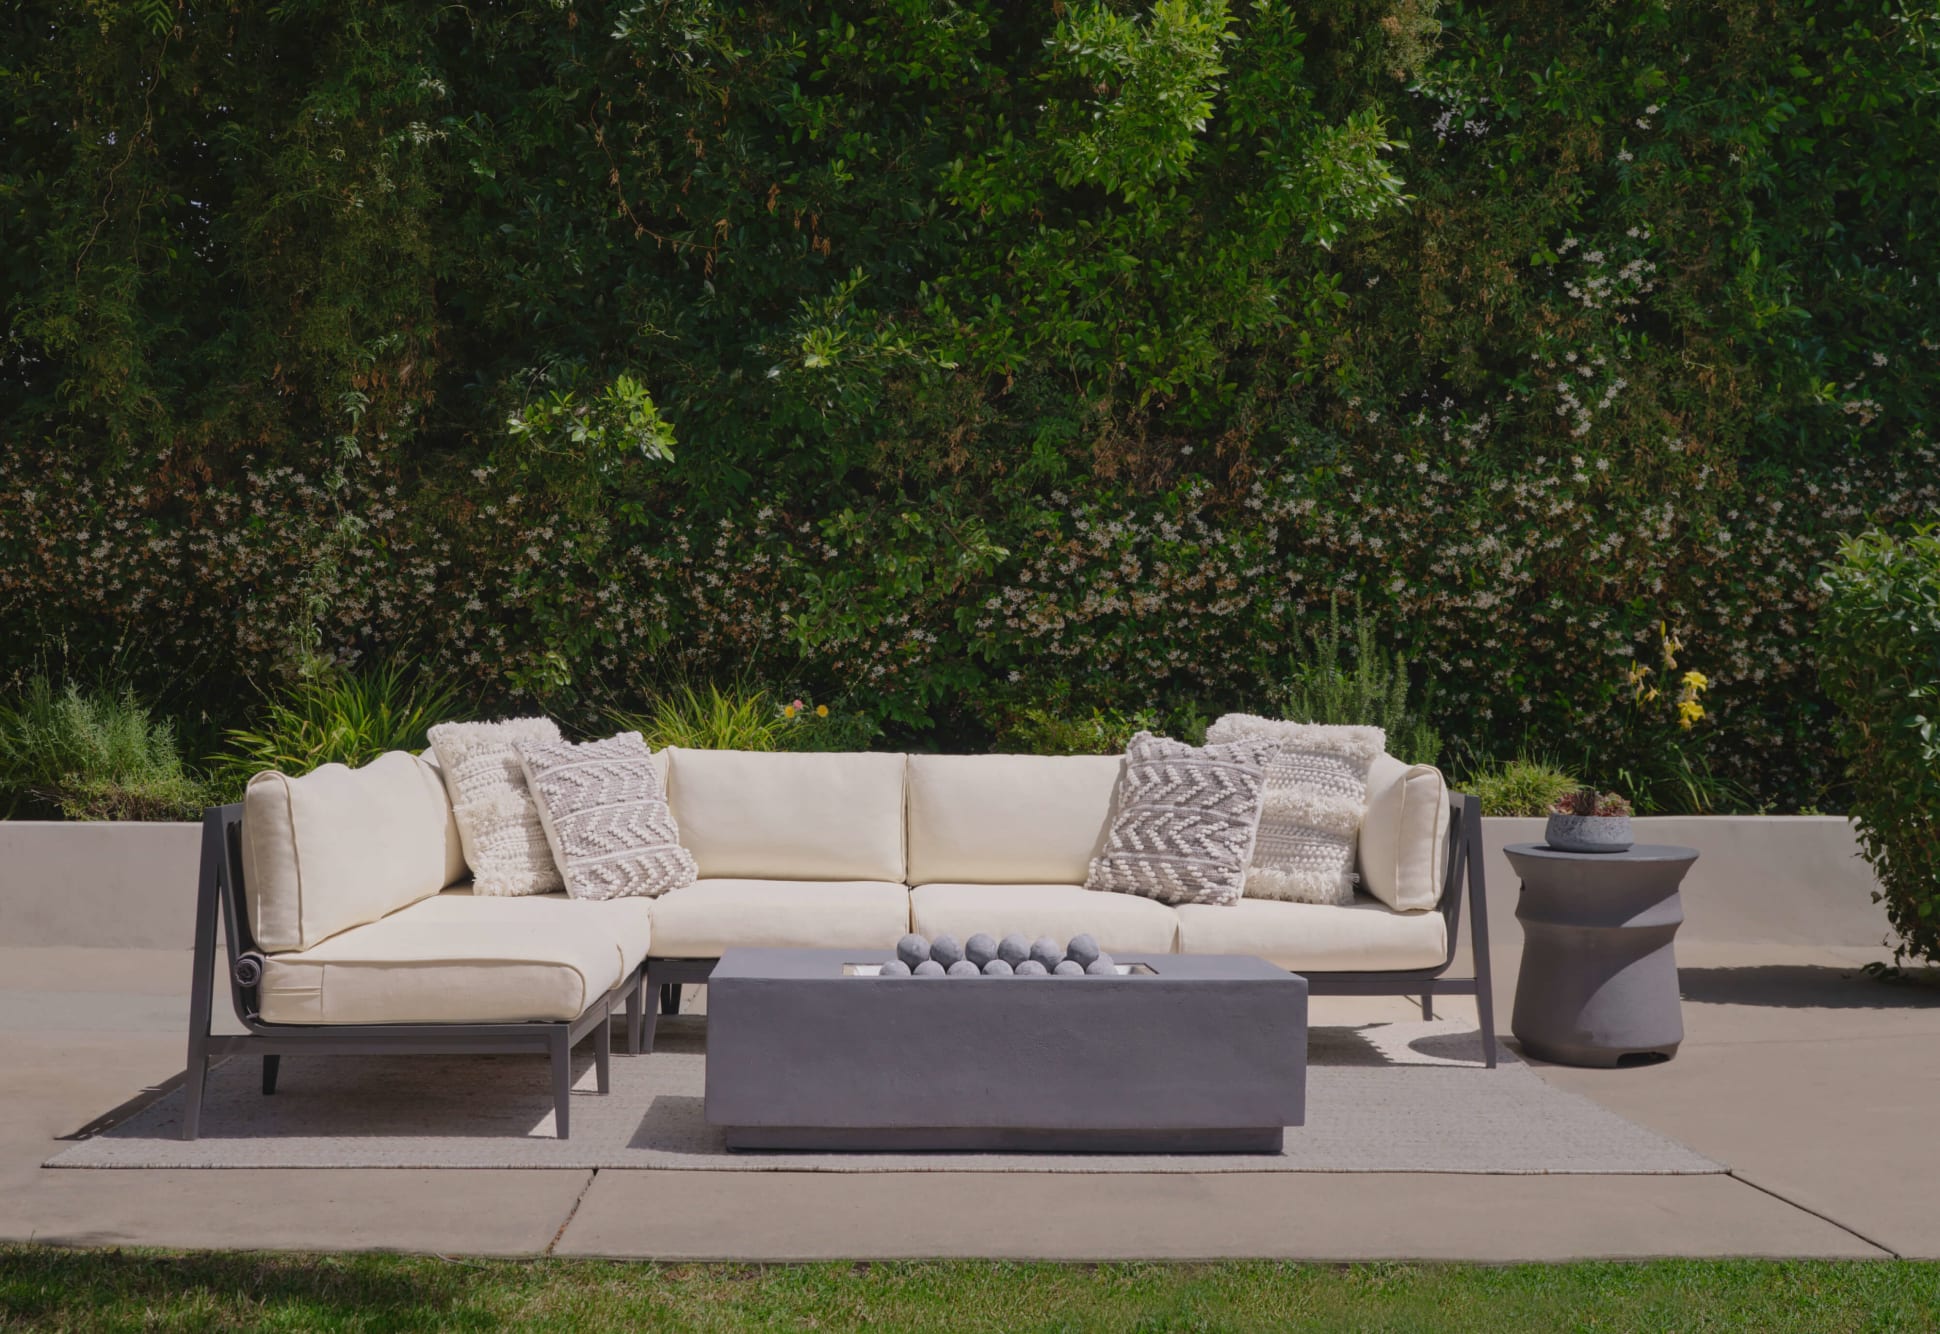 Live Outer 127" Charcoal Aluminum Outdoor Sofa With Armchairs and Palisades Cream Cushion (6-Seat)